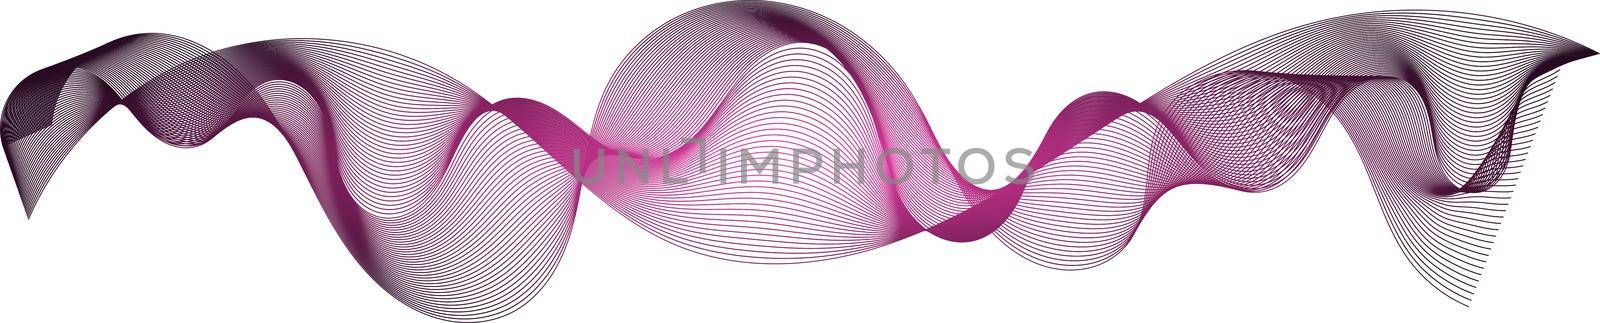 Abstract Wire Mesh Wave Background by NelliPolk